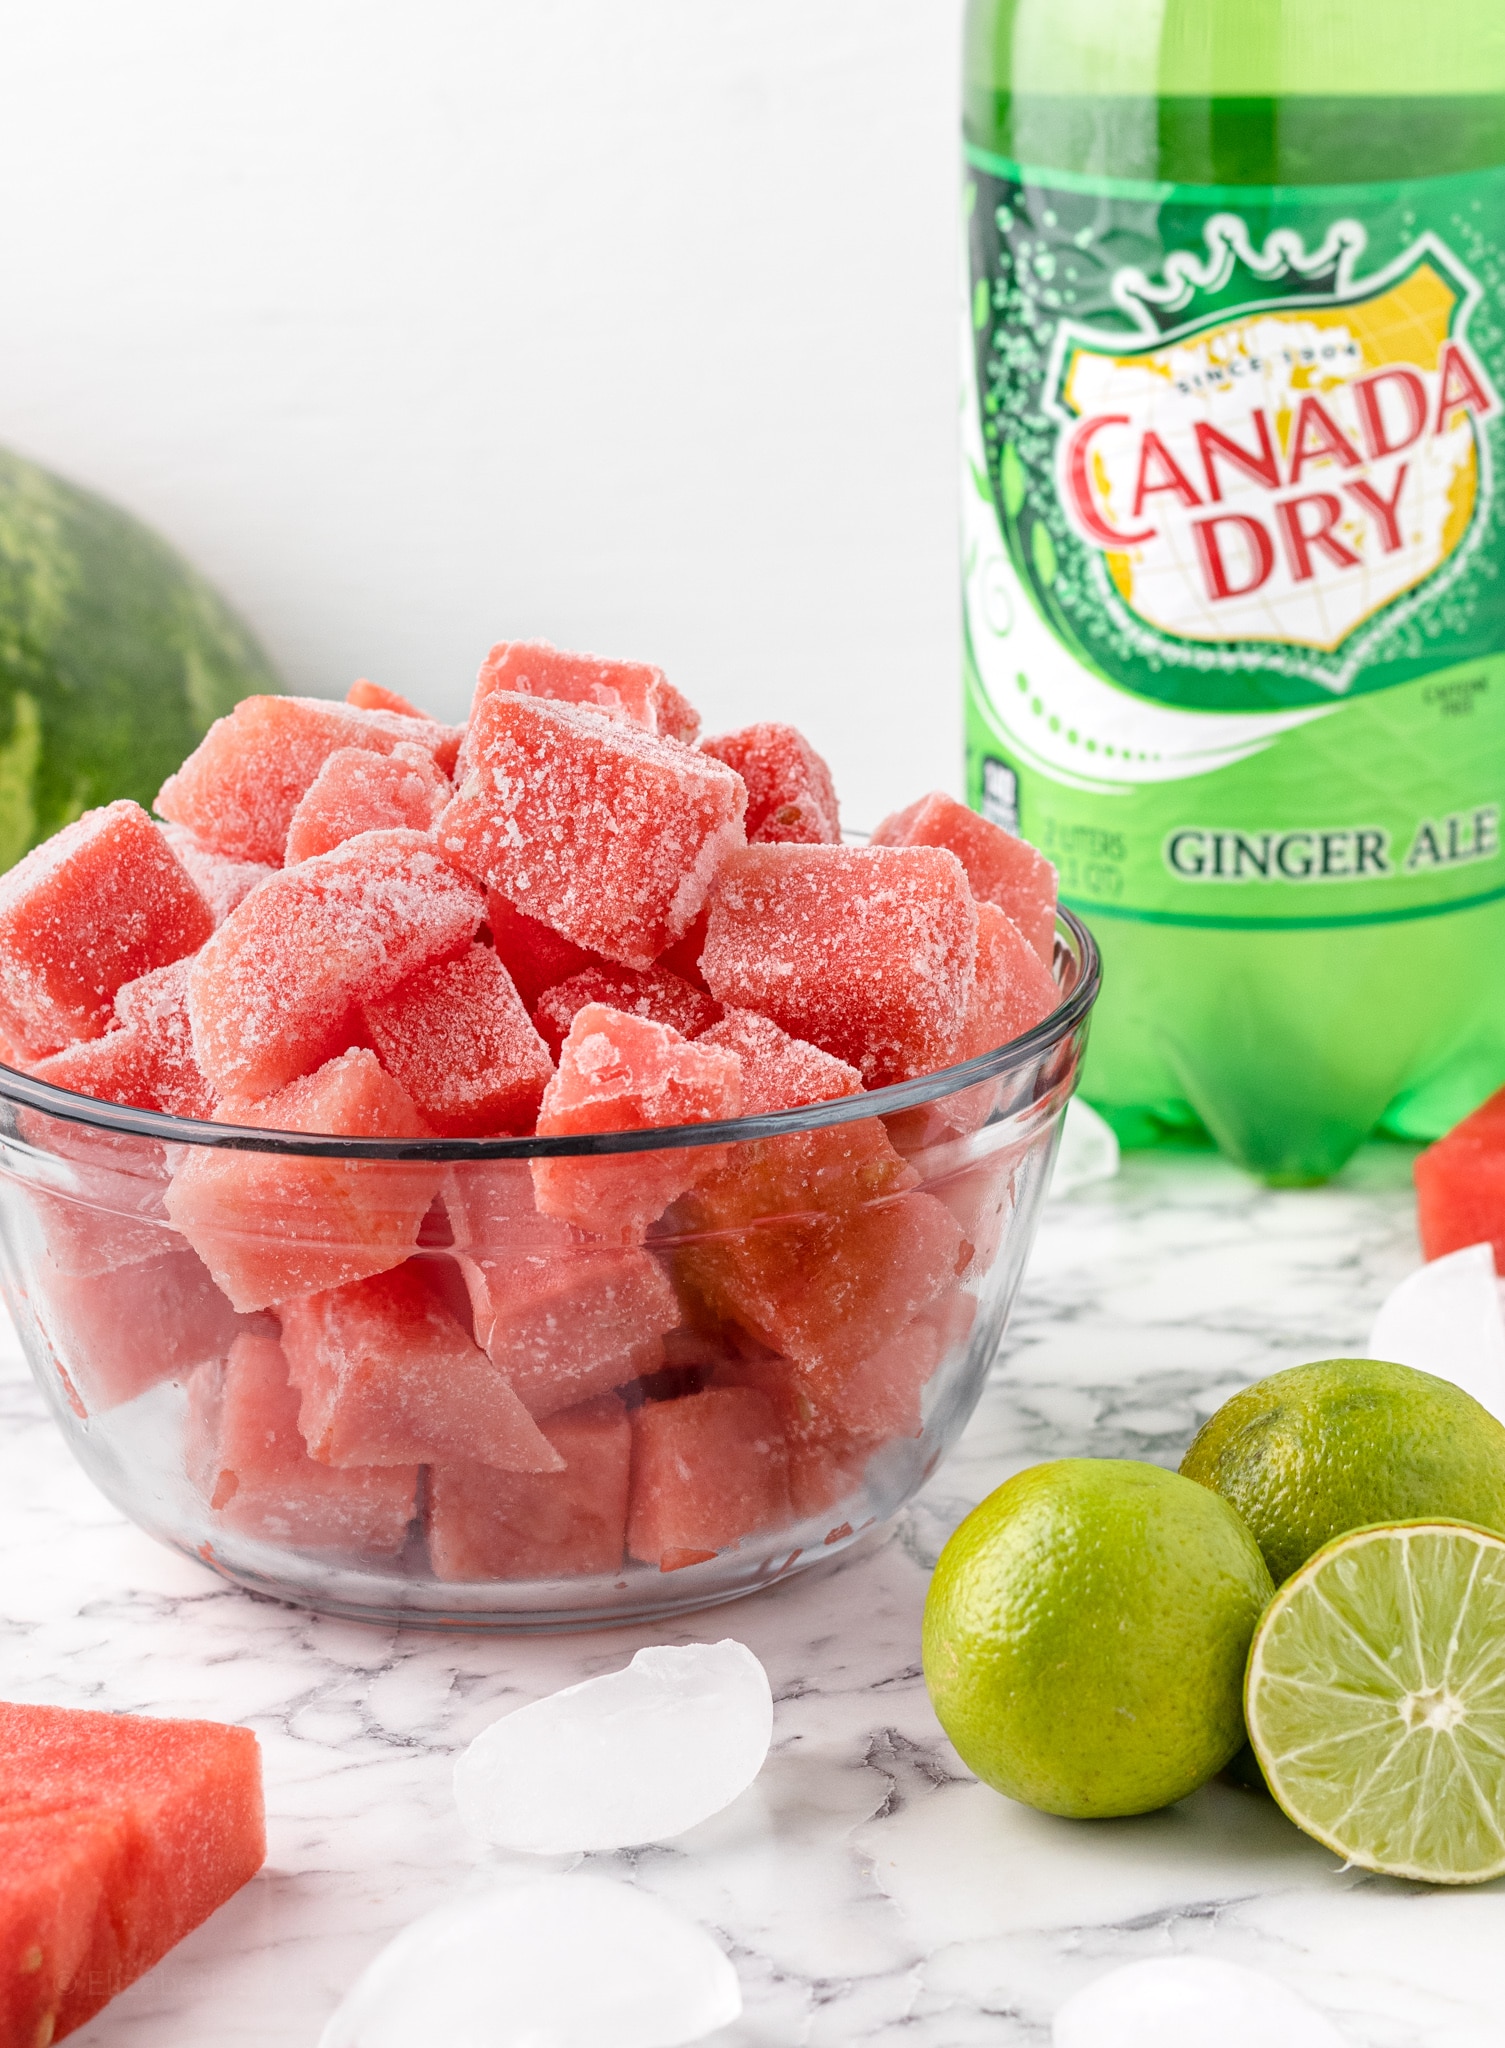 Ingredients are frozen watermelon, lime juice, water, ice, and ginger ale soda.